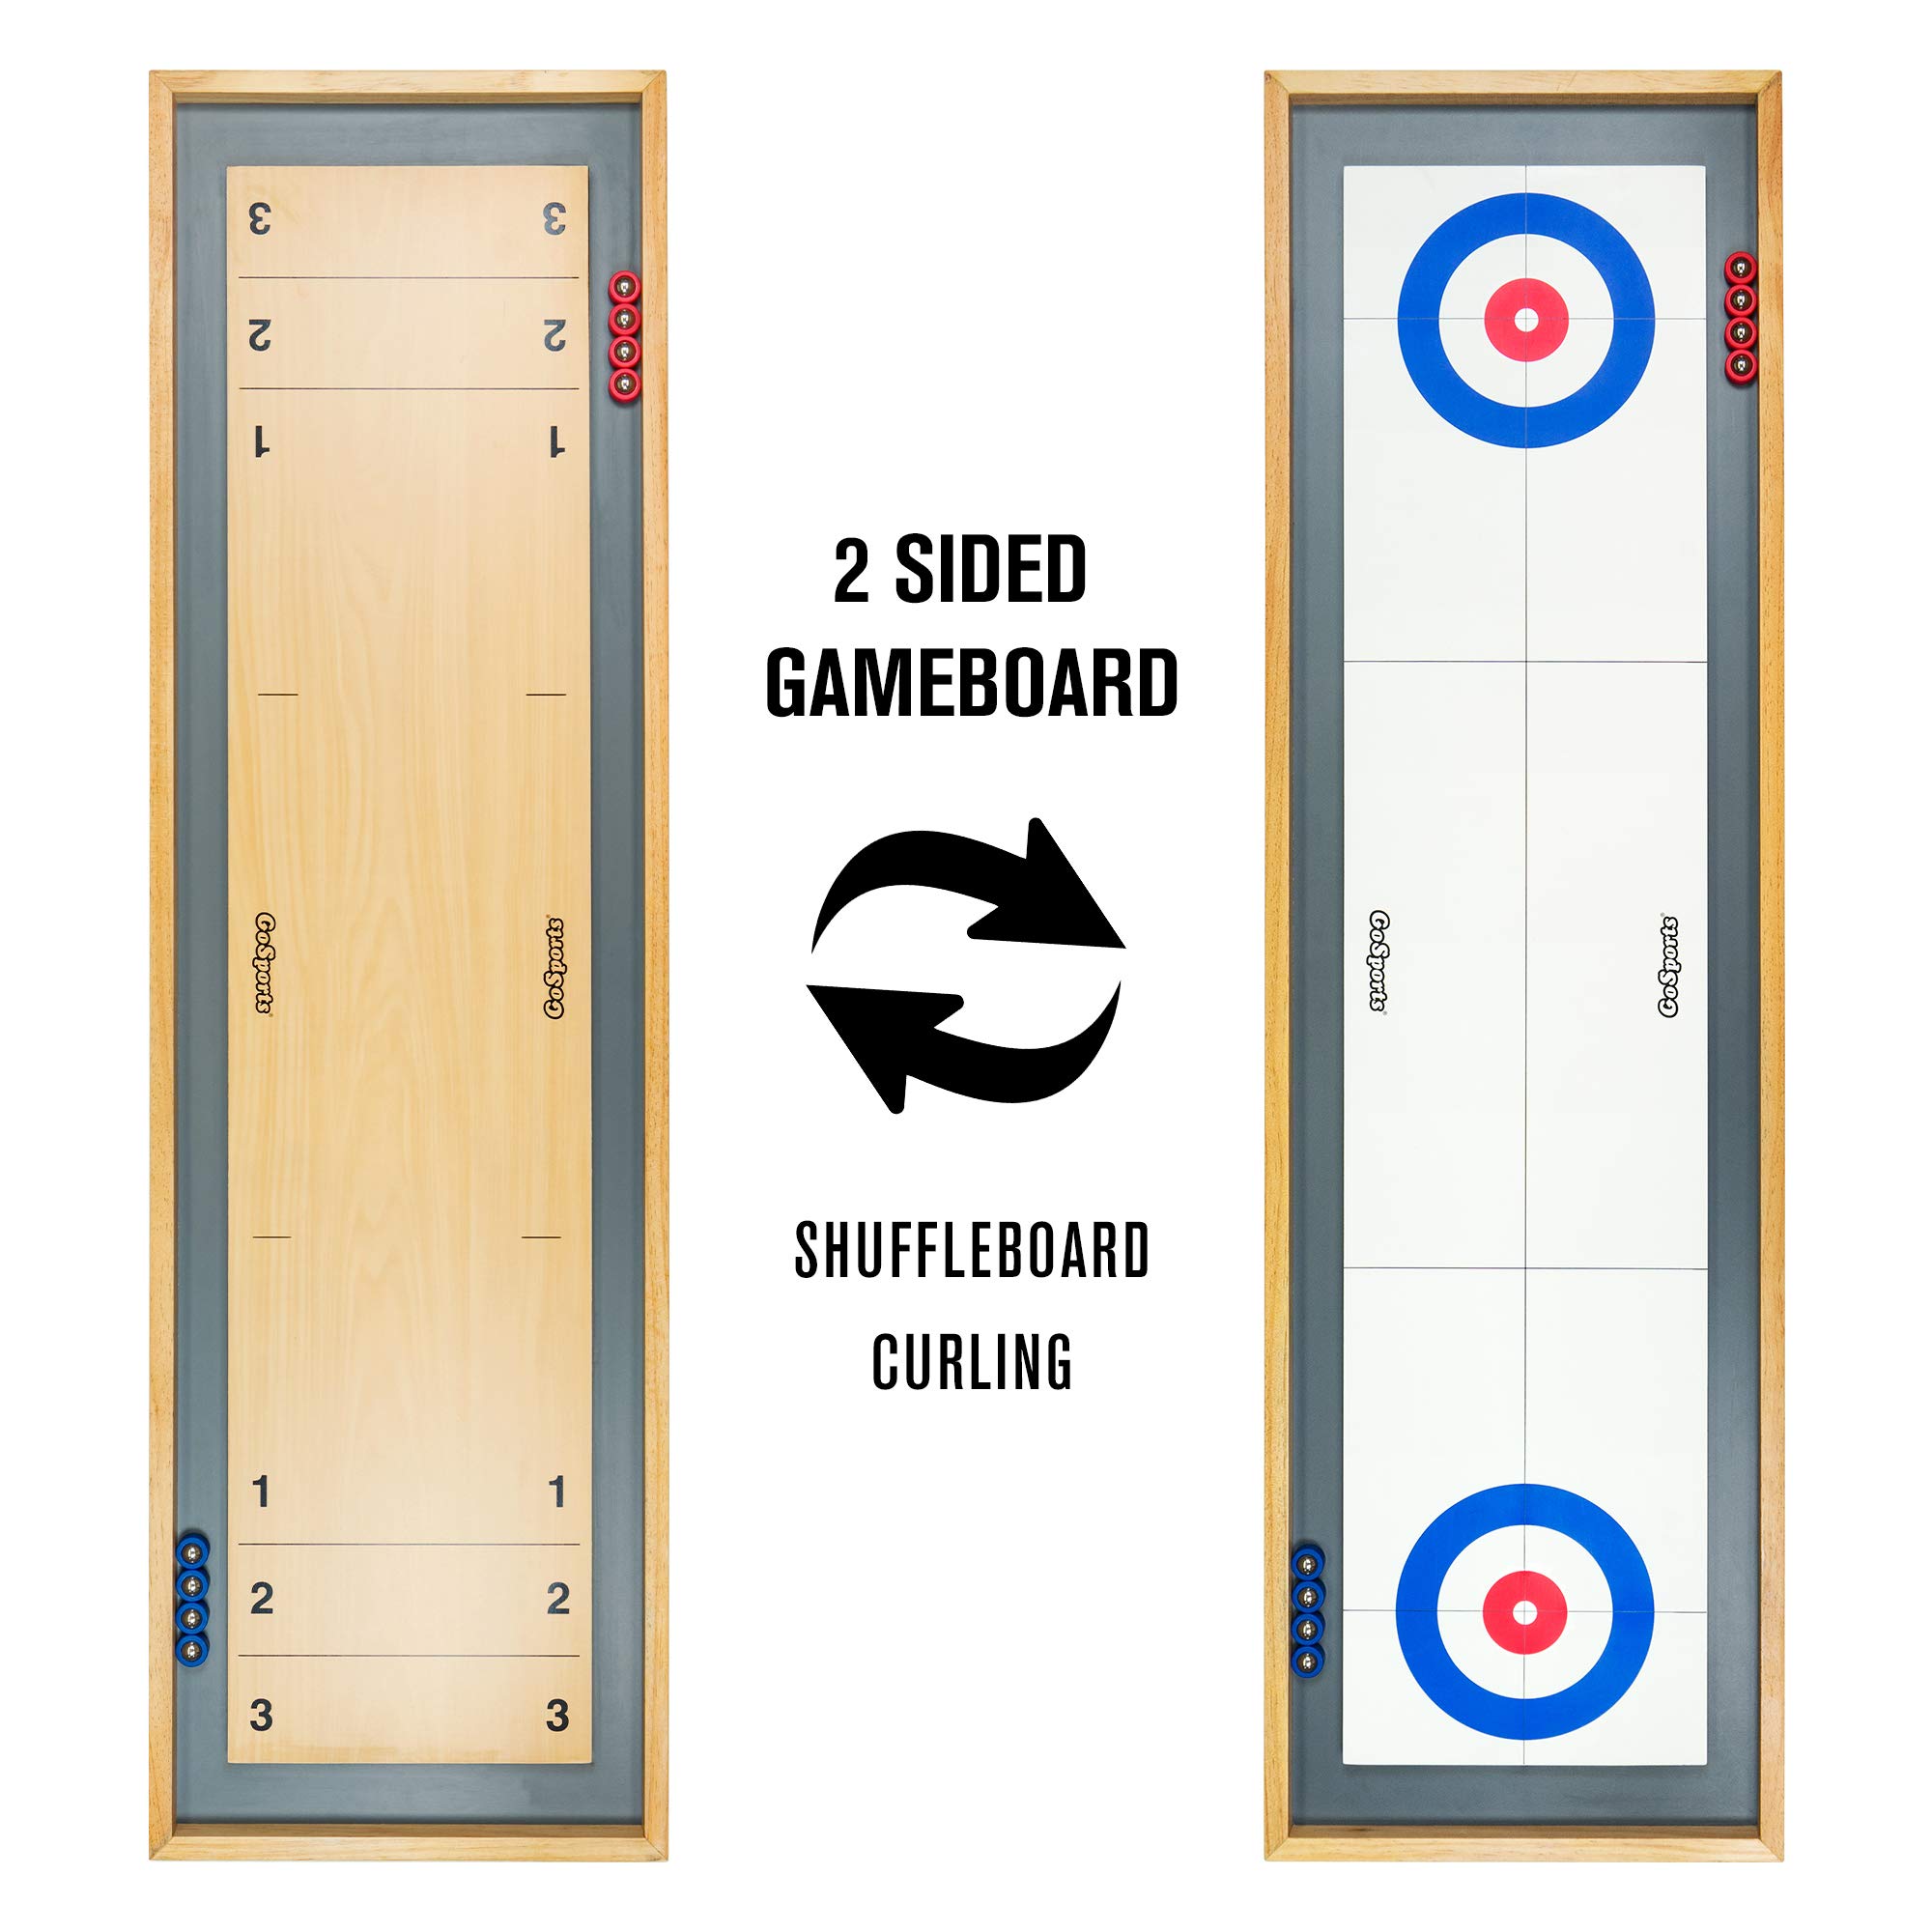 GoSports Shuffleboard and Curling 2 in 1 Board Games - Classic Tabletop or Giant Size - Choose Your Style